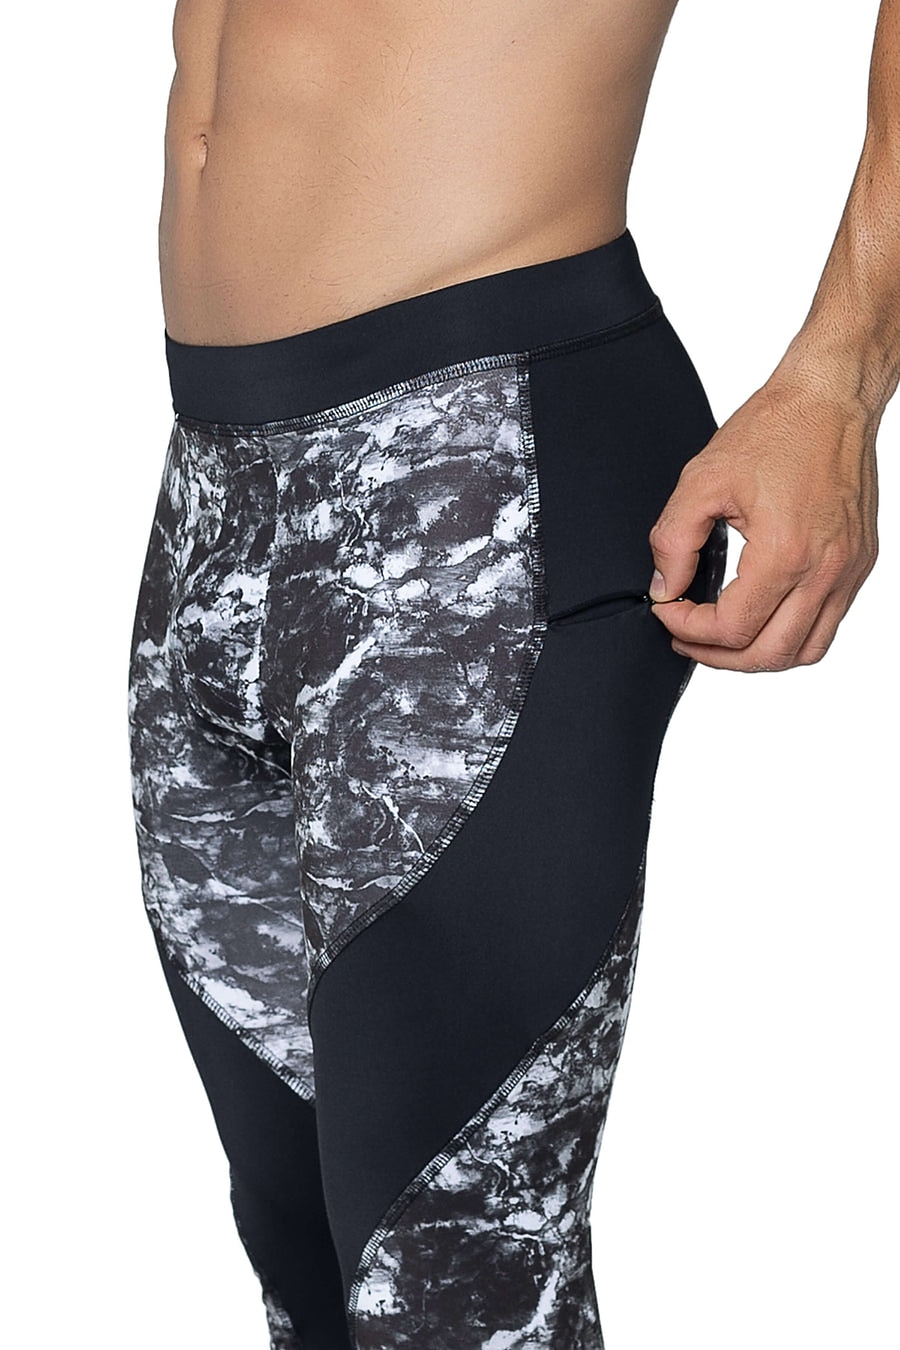 Men's Mesh Long Pants Leggings Breathable Compression Running Athletic  Trousers | eBay